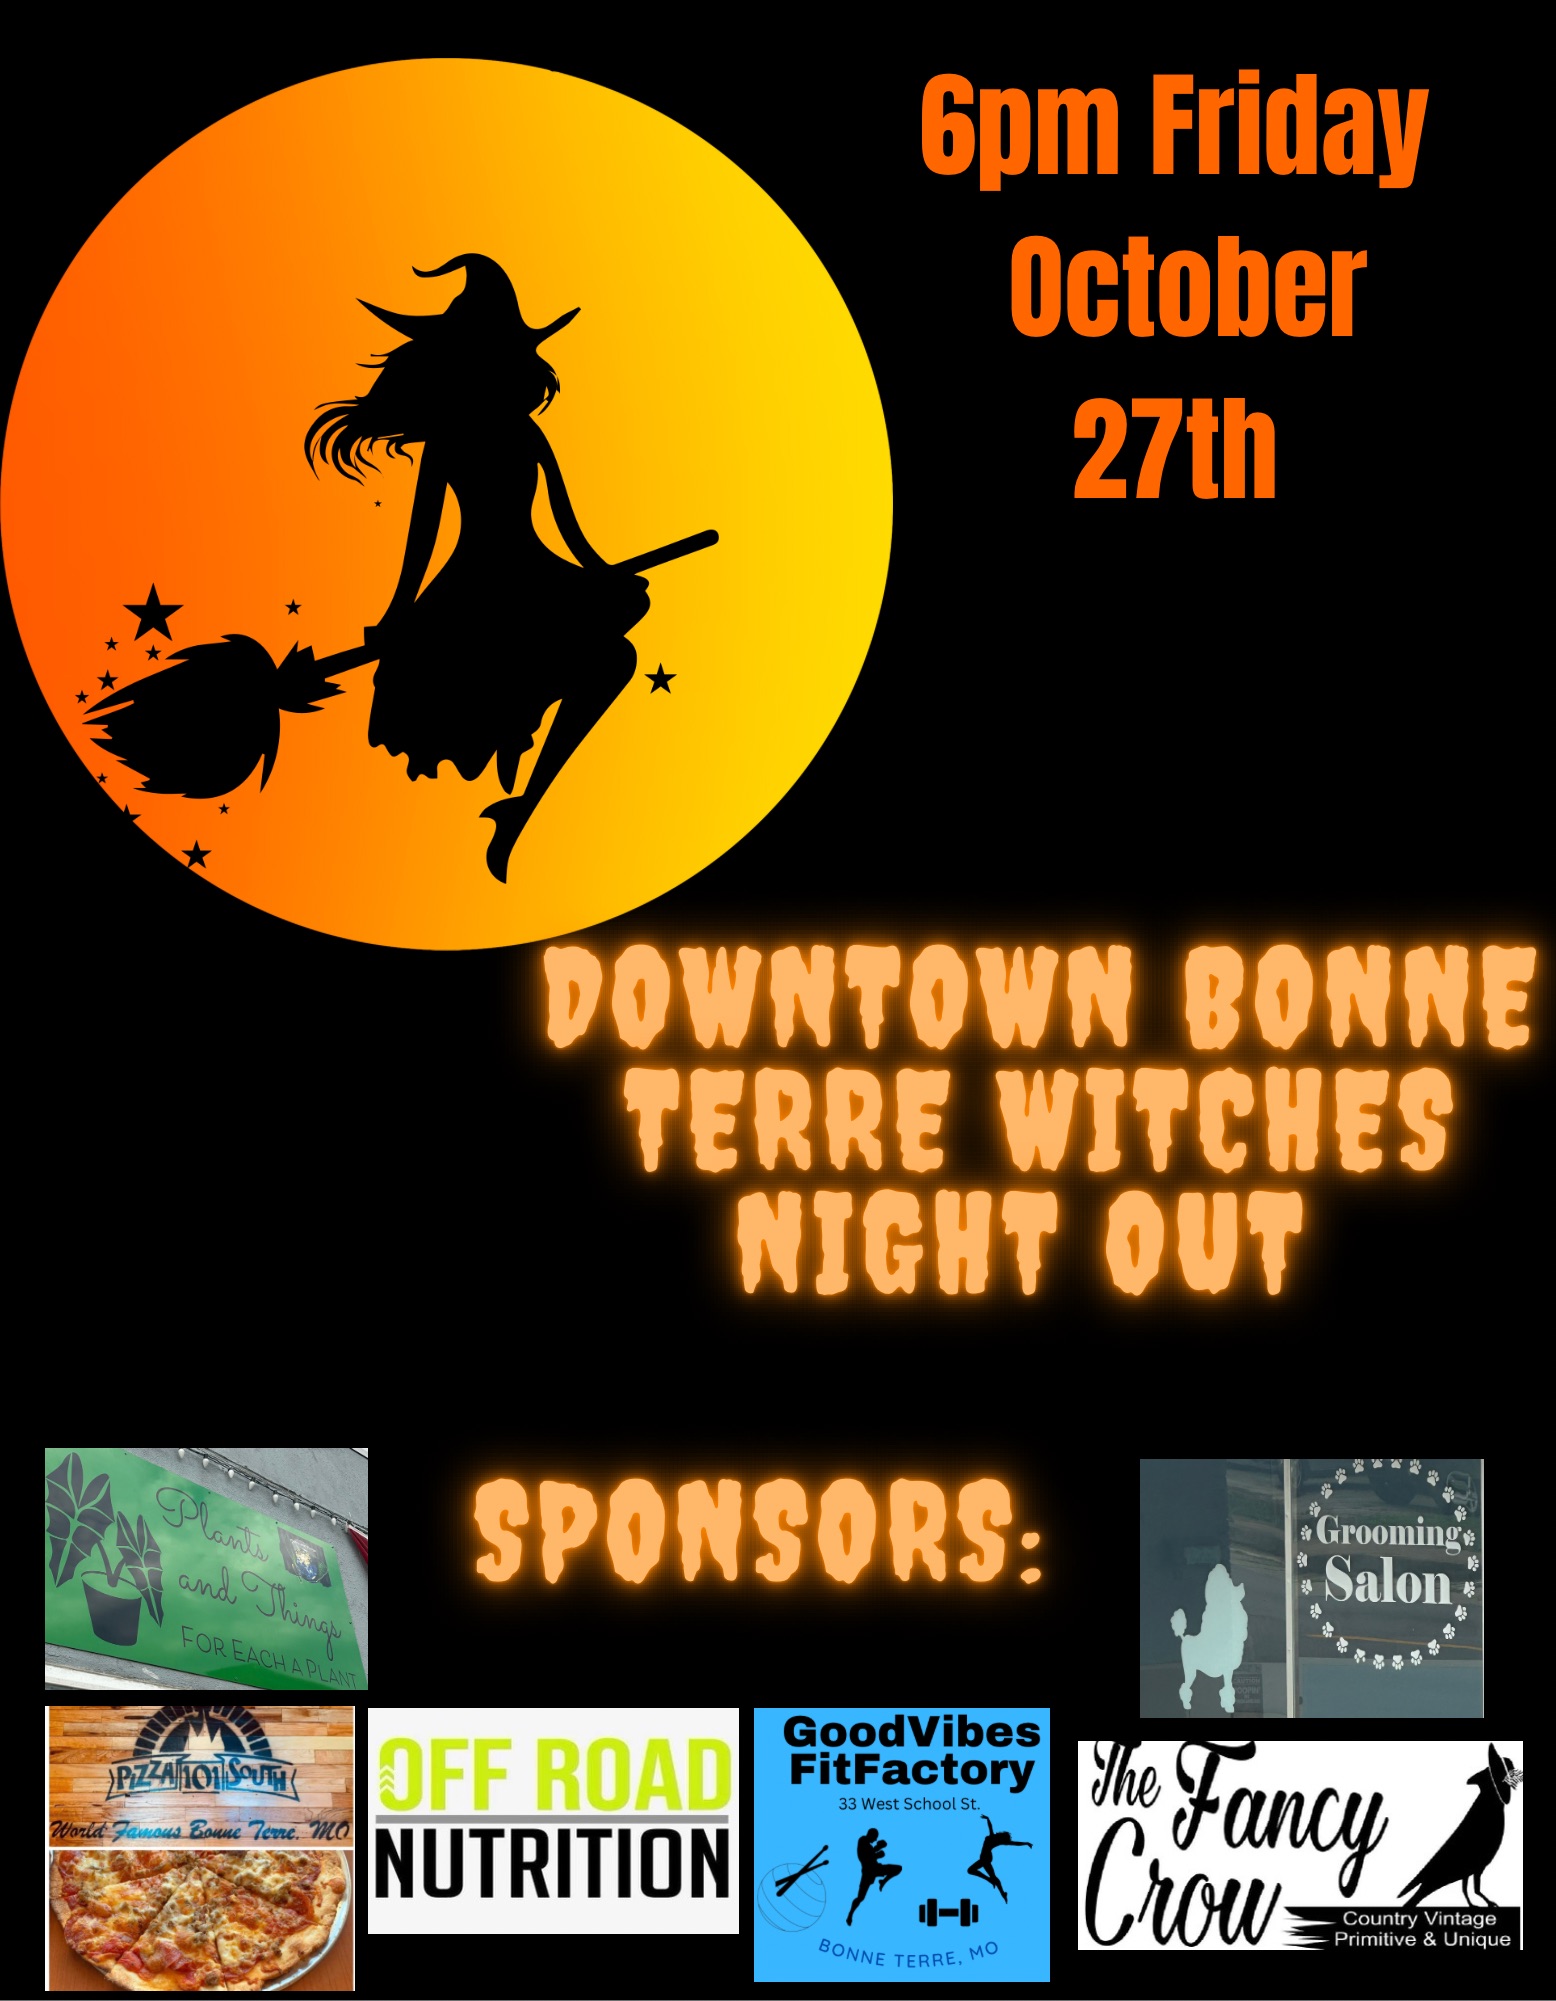 Downtown Bonne Terre Witches Night Out